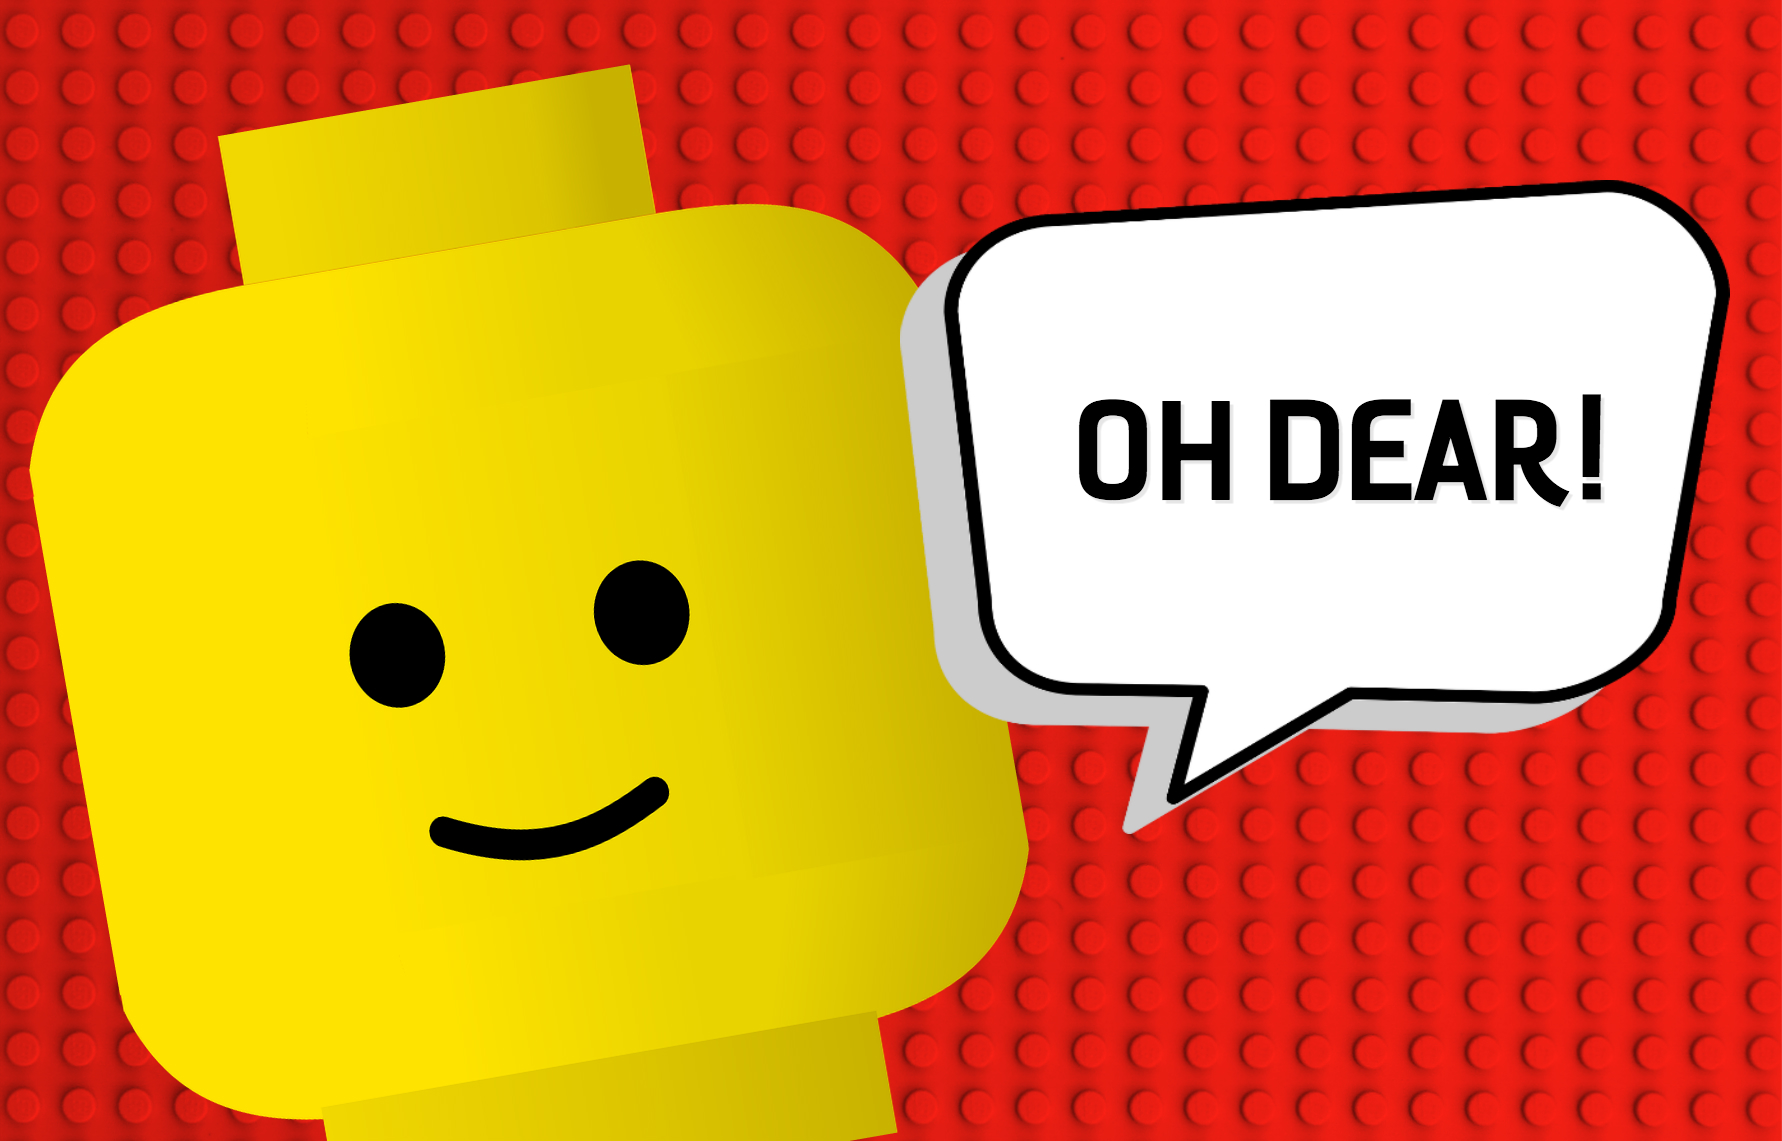 The Ultimate LEGO Quiz | Quizzes on Beano.com